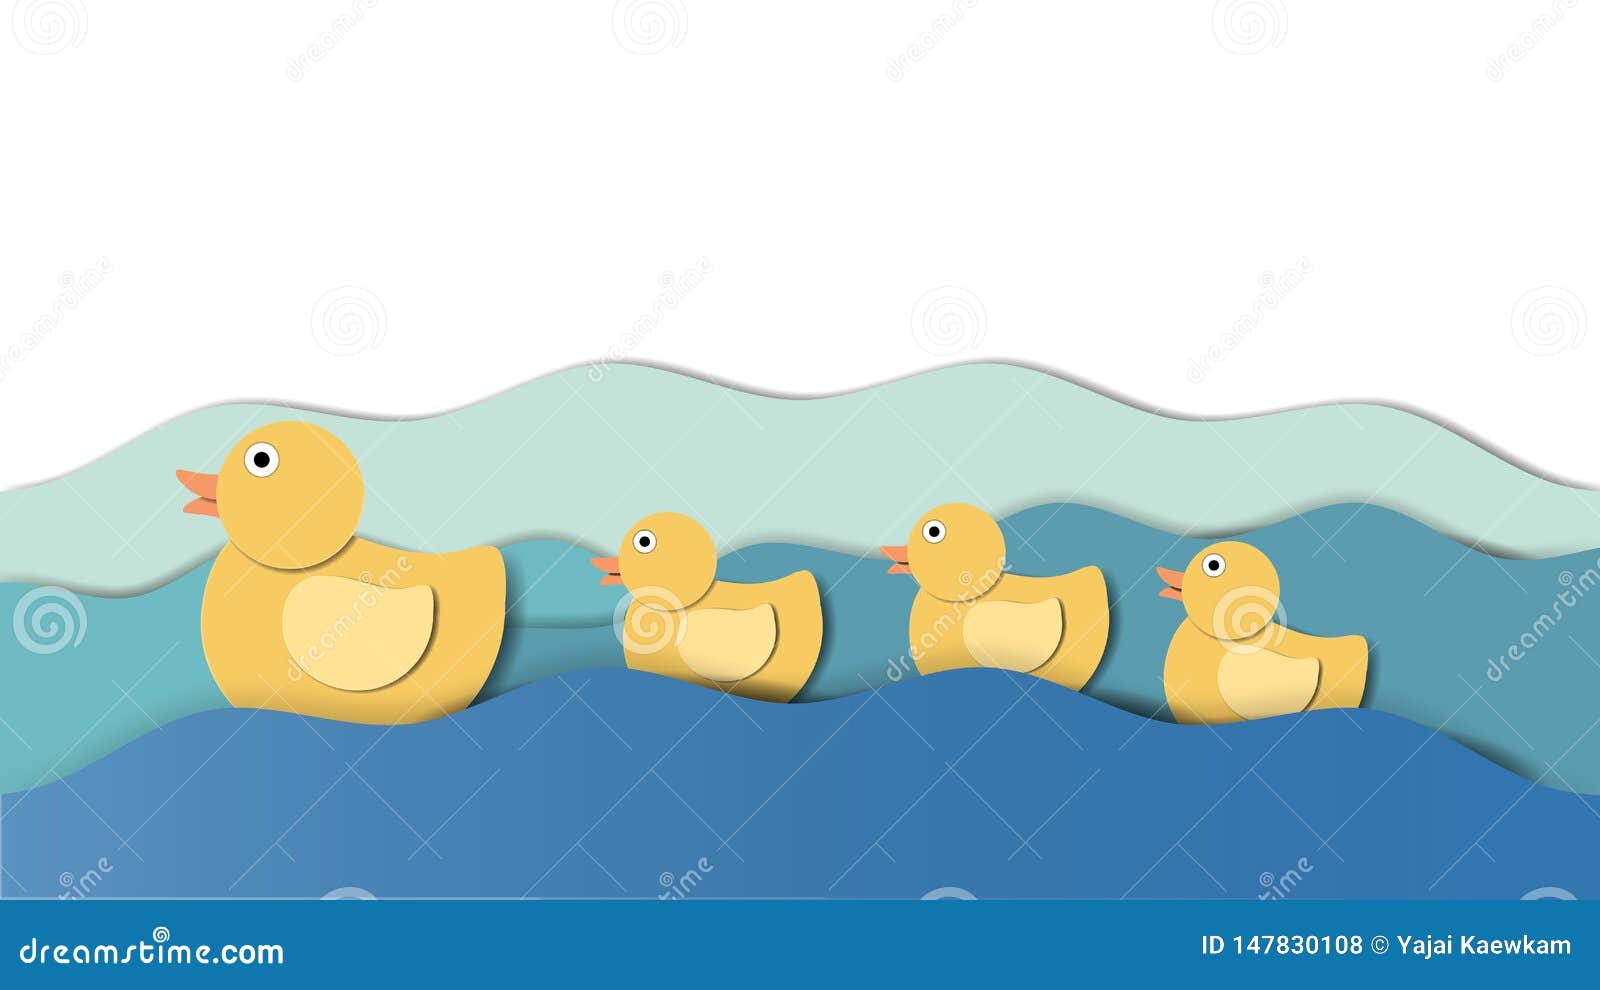 Printable Rubber Duck Paper Craft